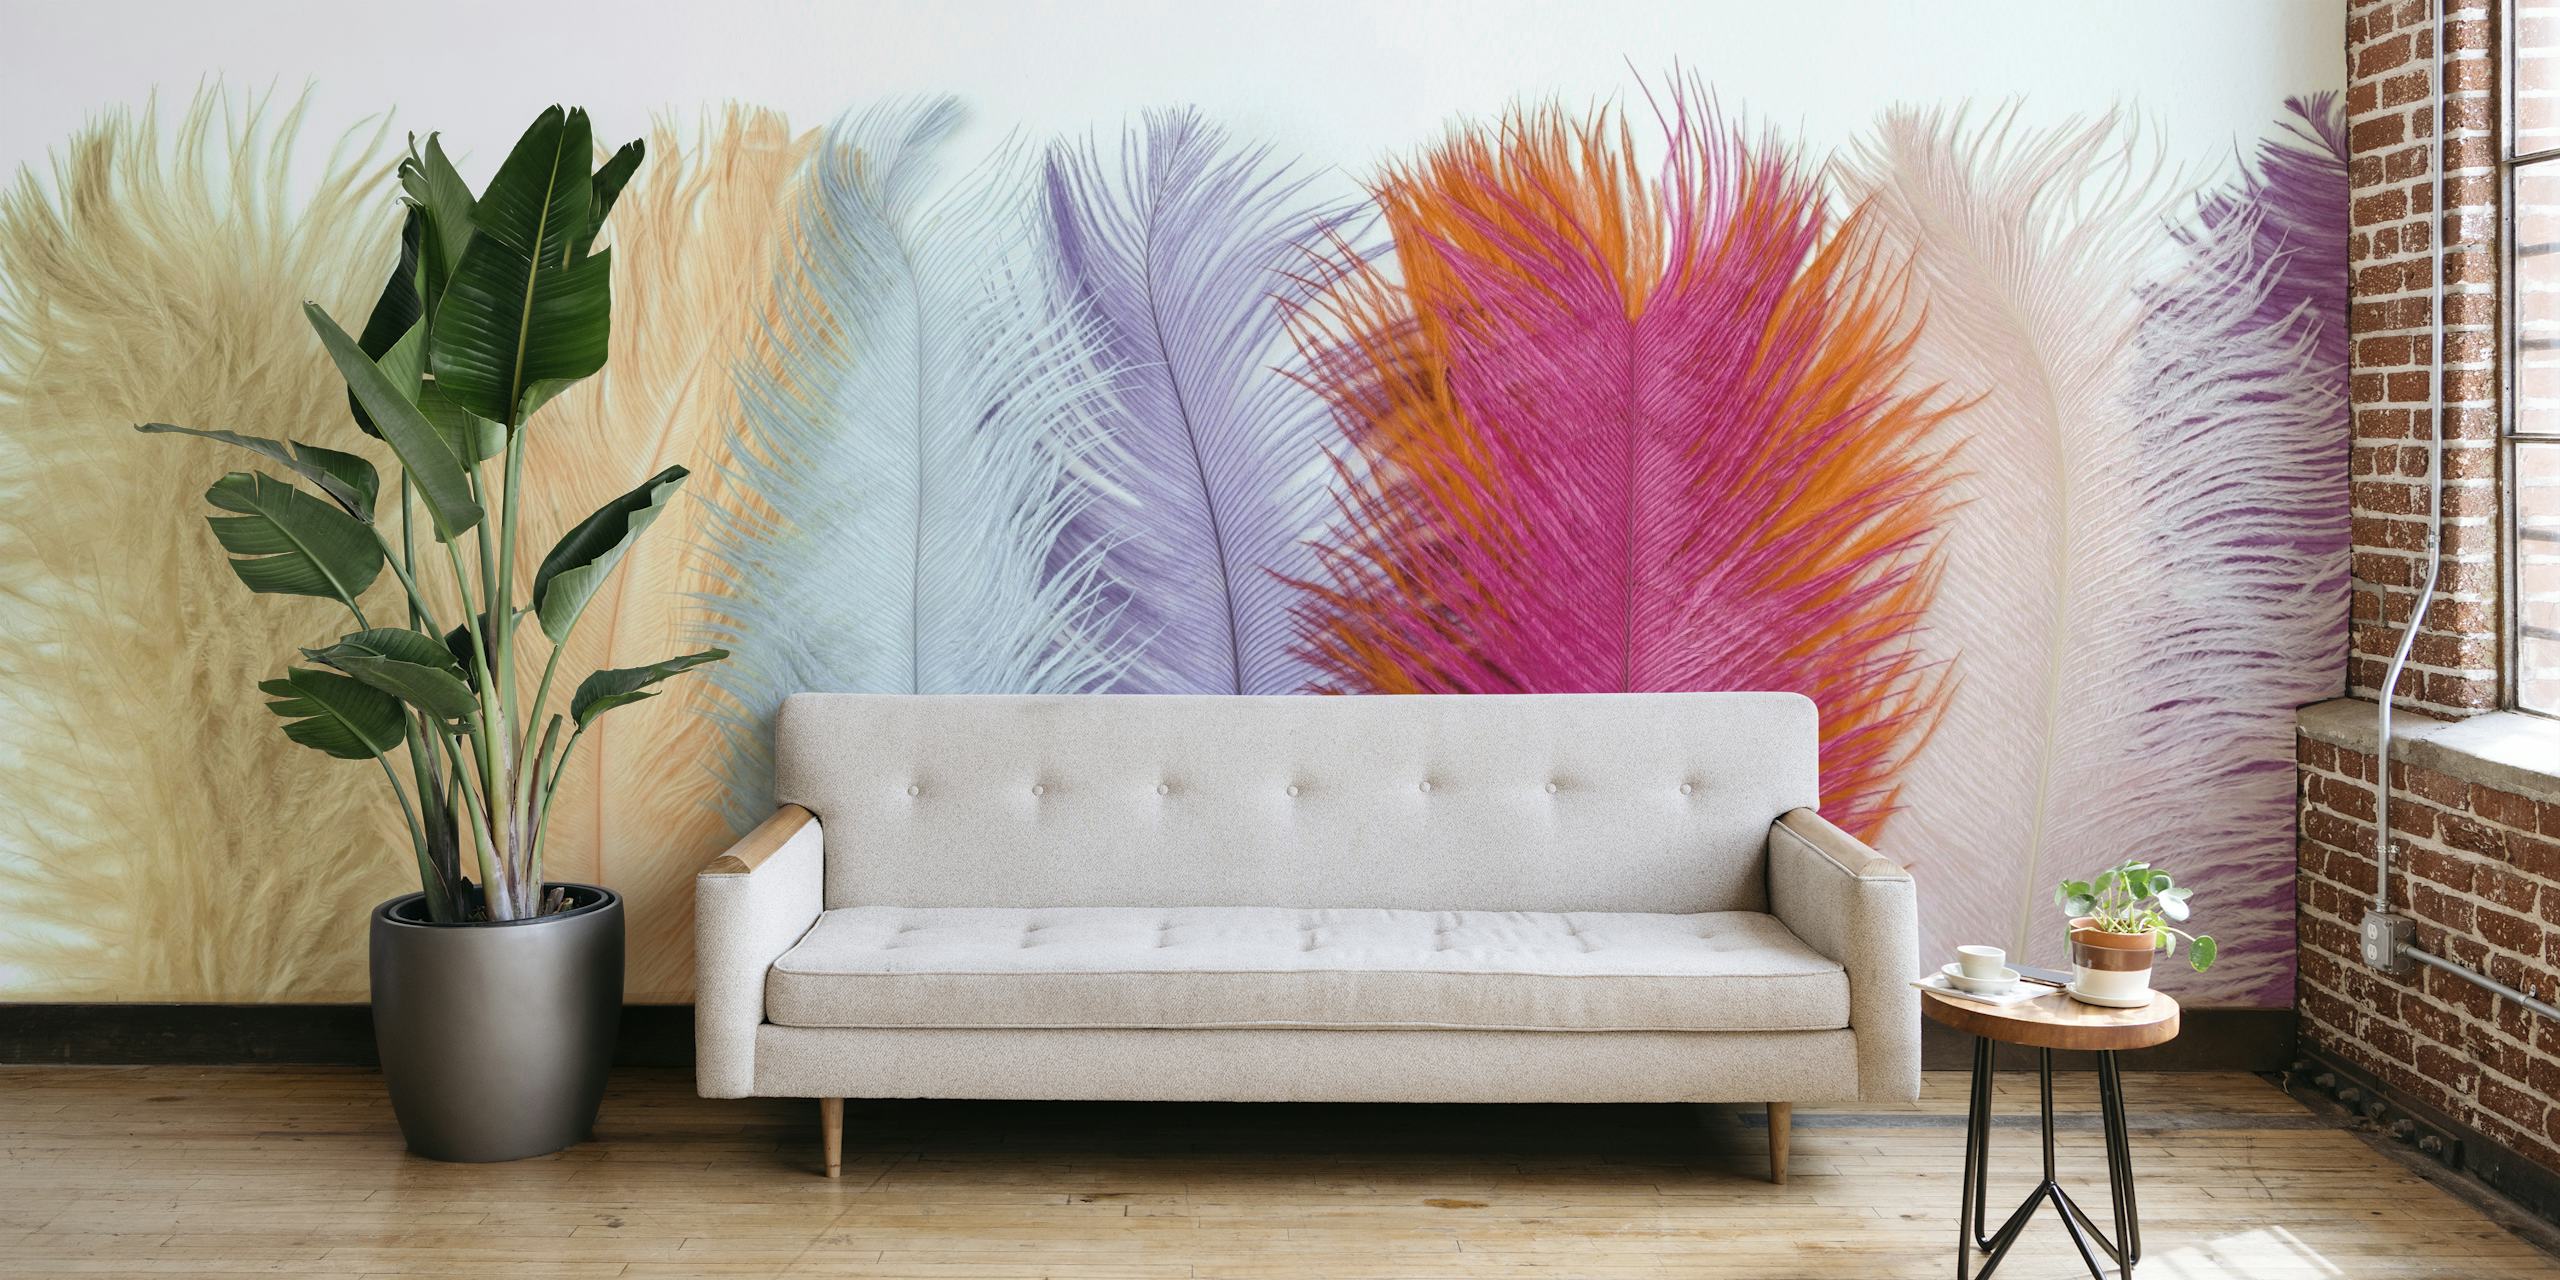 Feathers of Pastel behang